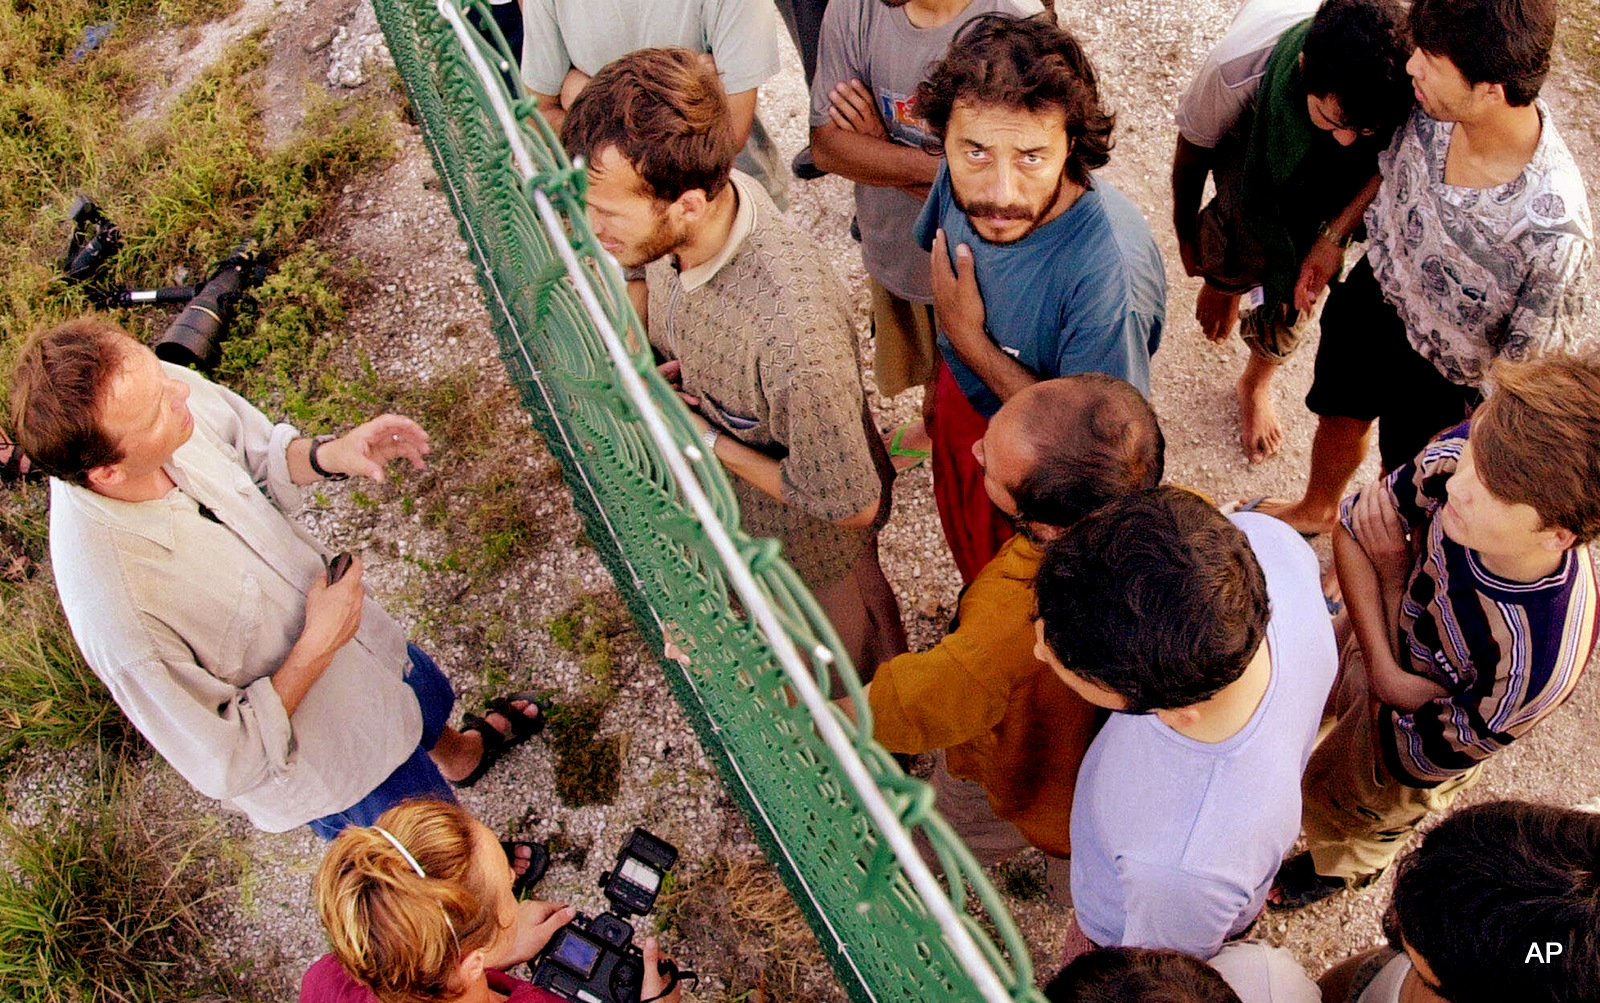 In this Sept. 19, 2001, file photo, refugees, right, gather on one side of a fence to talk with international journalists about their journey that brought them to the Island of Nauru. Human rights groups accused Australia on Wednesday, Aug. 3, 2016, of deliberately ignoring the abuse of asylum seekers being held at the remote Pacific island detention camp in a bid to deter future refugees from trying to reach the country by boat. 